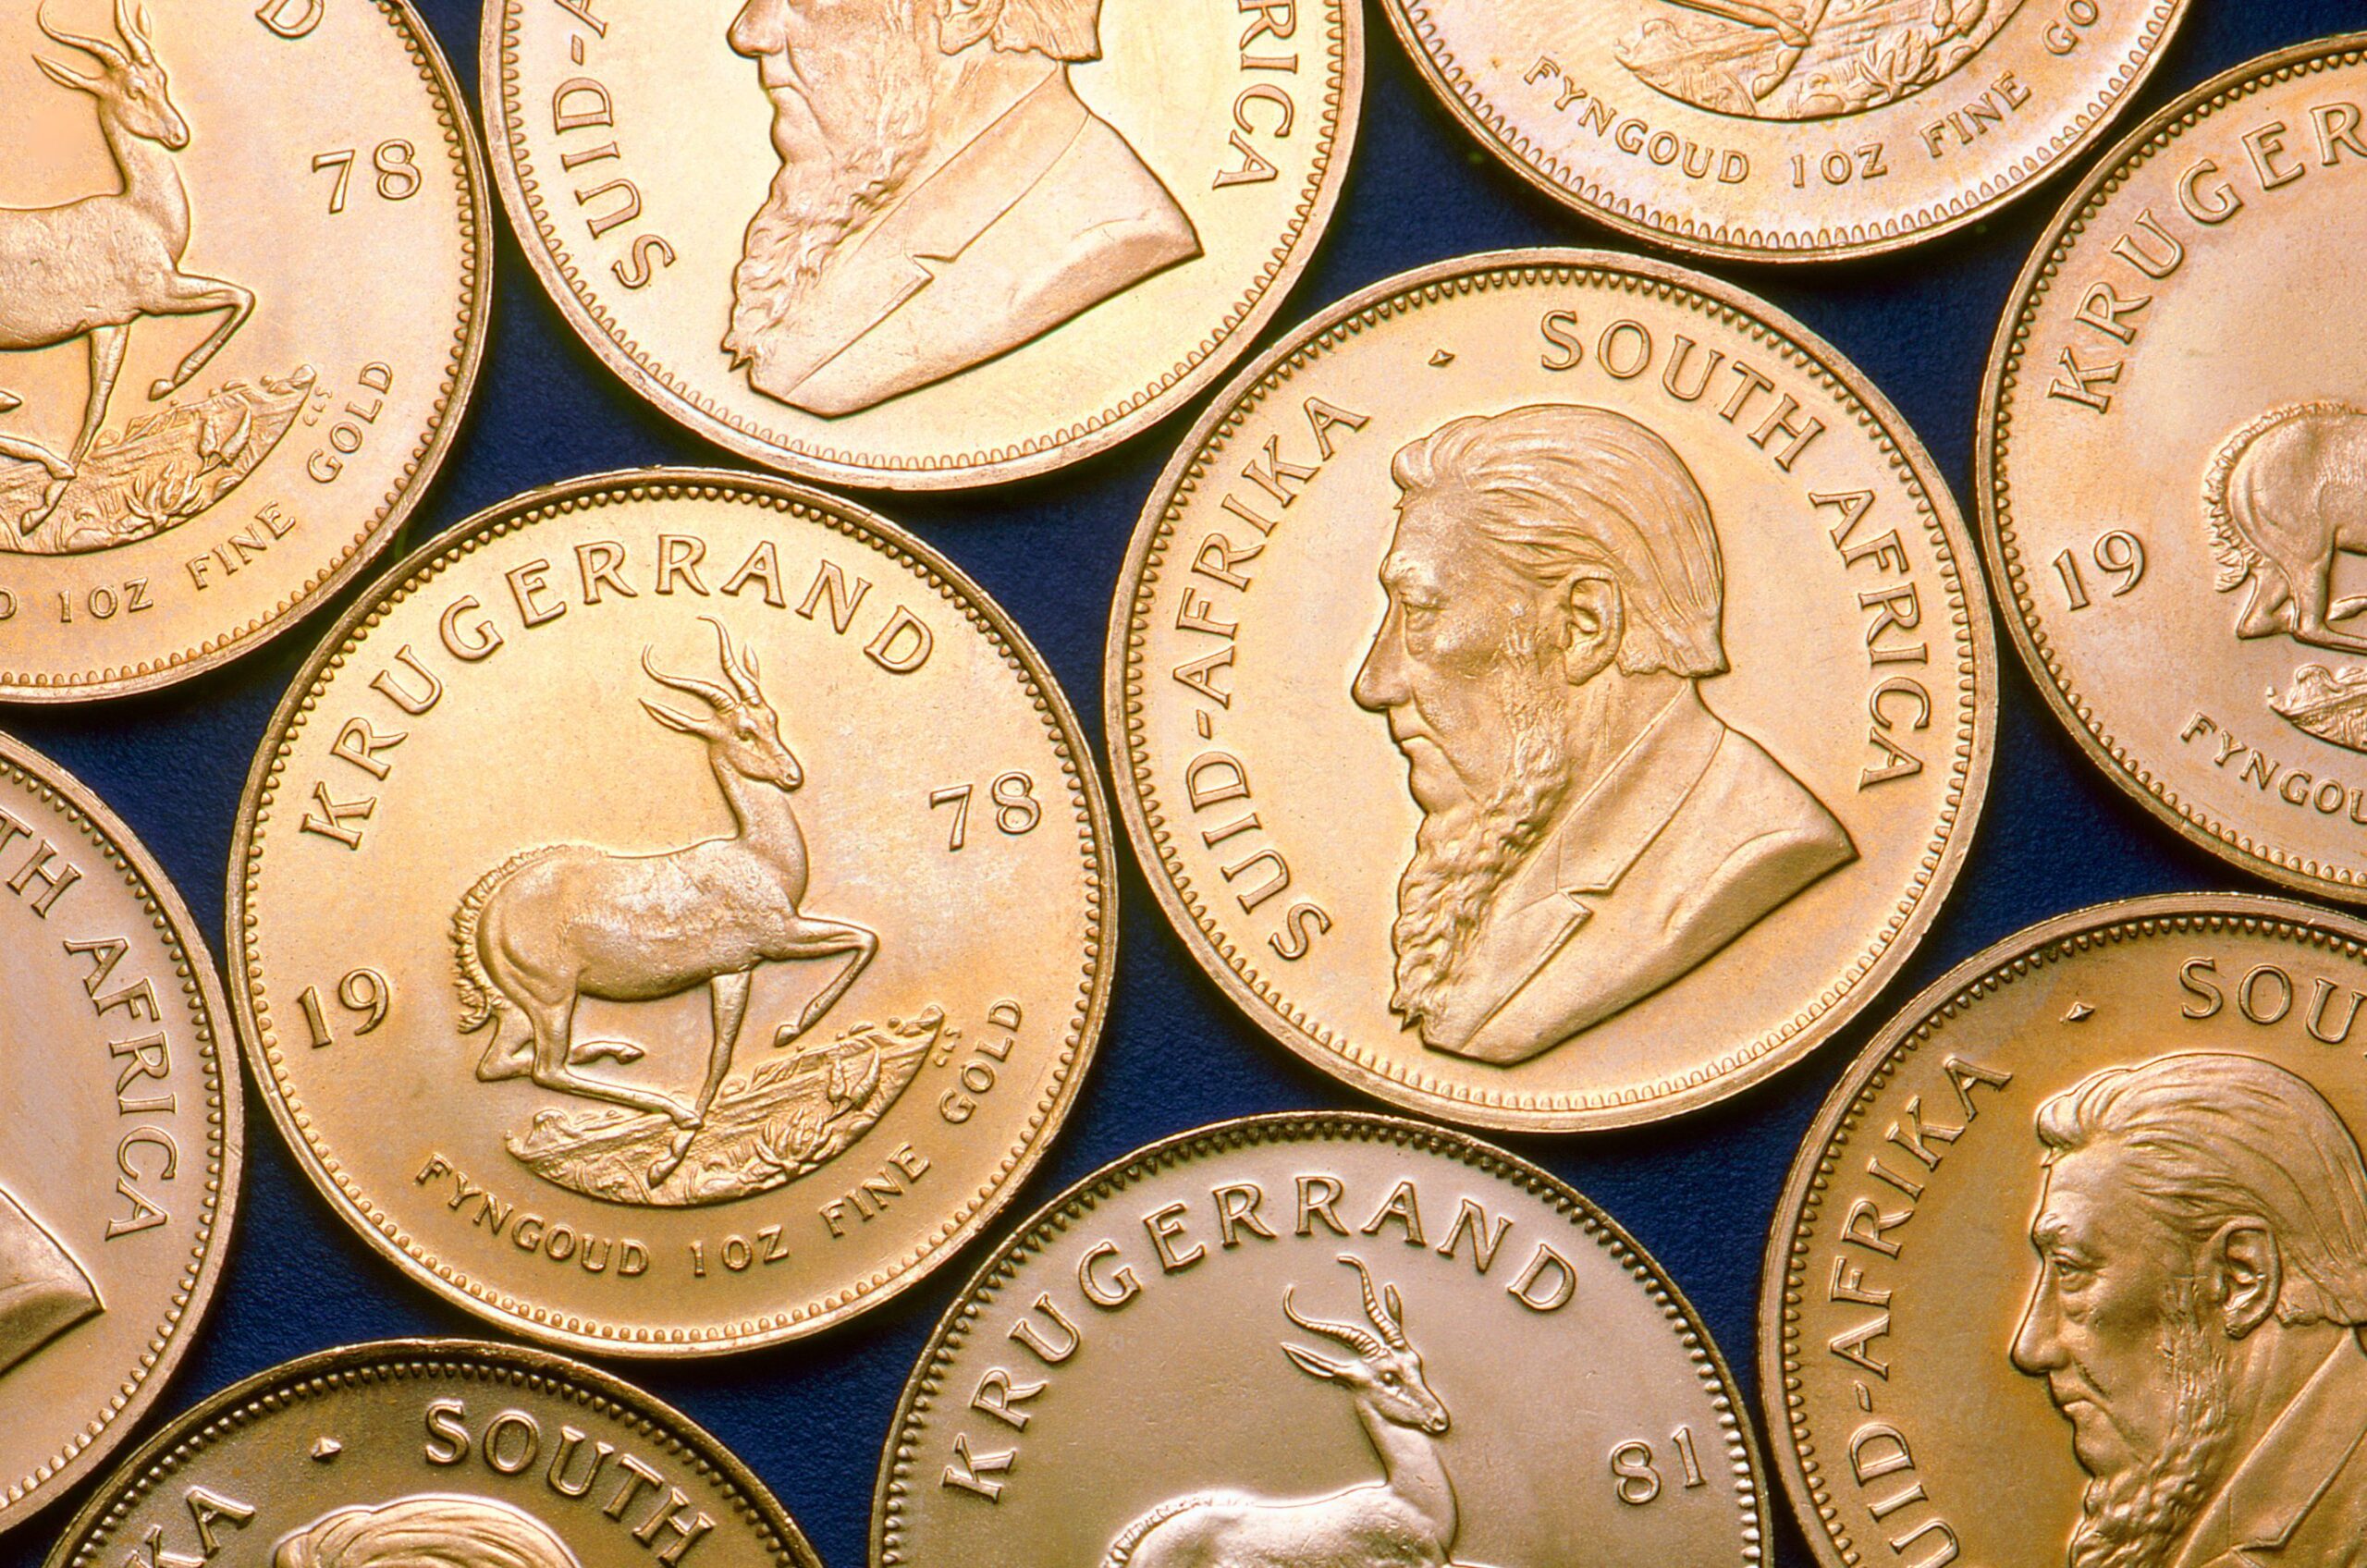 Why You Should Sell Your Valuable Gold Coins